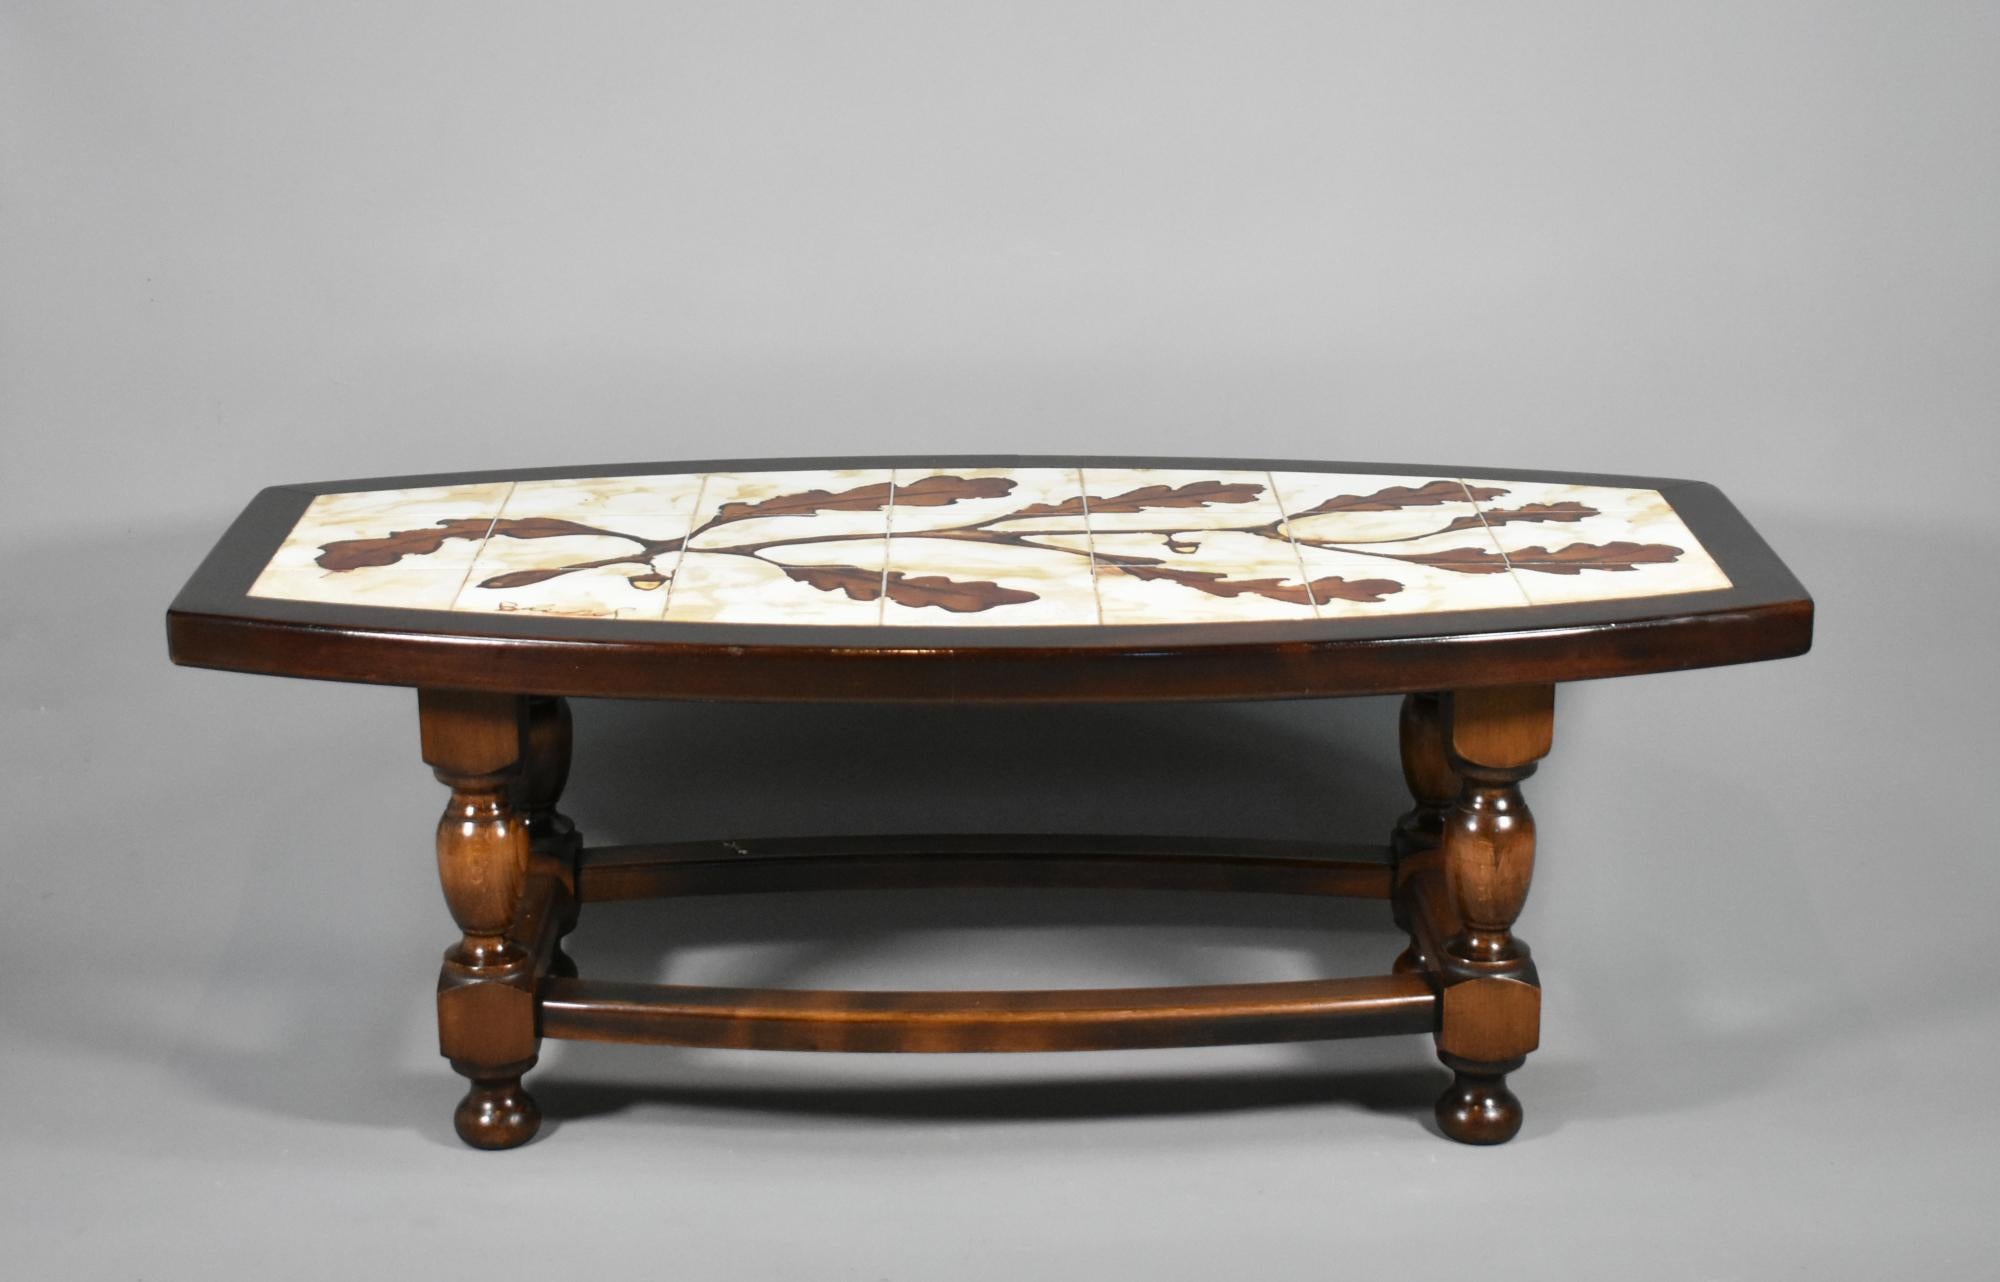 1970s French Designer Coffee Table with Tiled Signed Top
 
This classically designed coffee table features hand drawn oak leaves and acorns decorated in gloss finish over individually coloured earthenware tiles that are inset into a carved thick